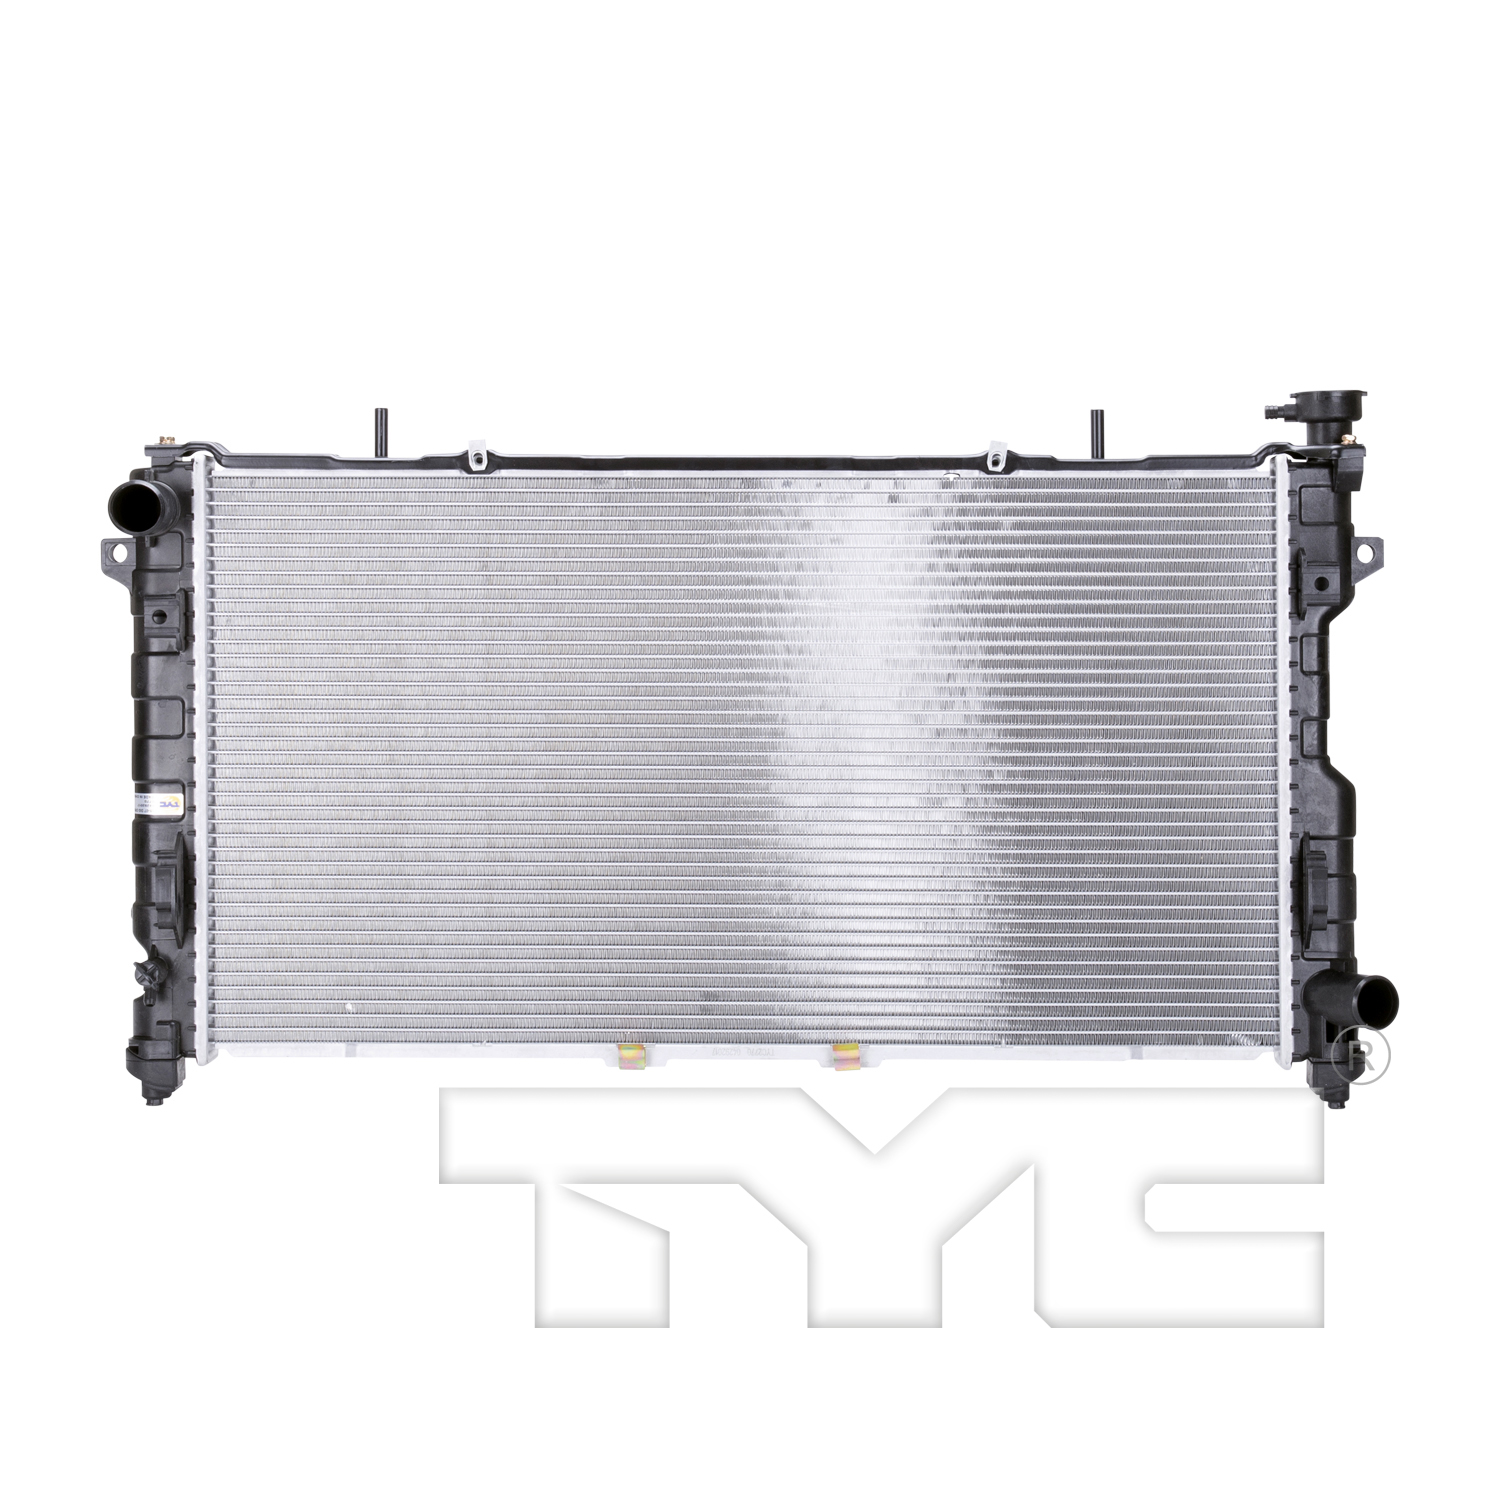 Aftermarket RADIATORS for CHRYSLER - TOWN & COUNTRY, TOWN & COUNTRY,05-05,Radiator assembly